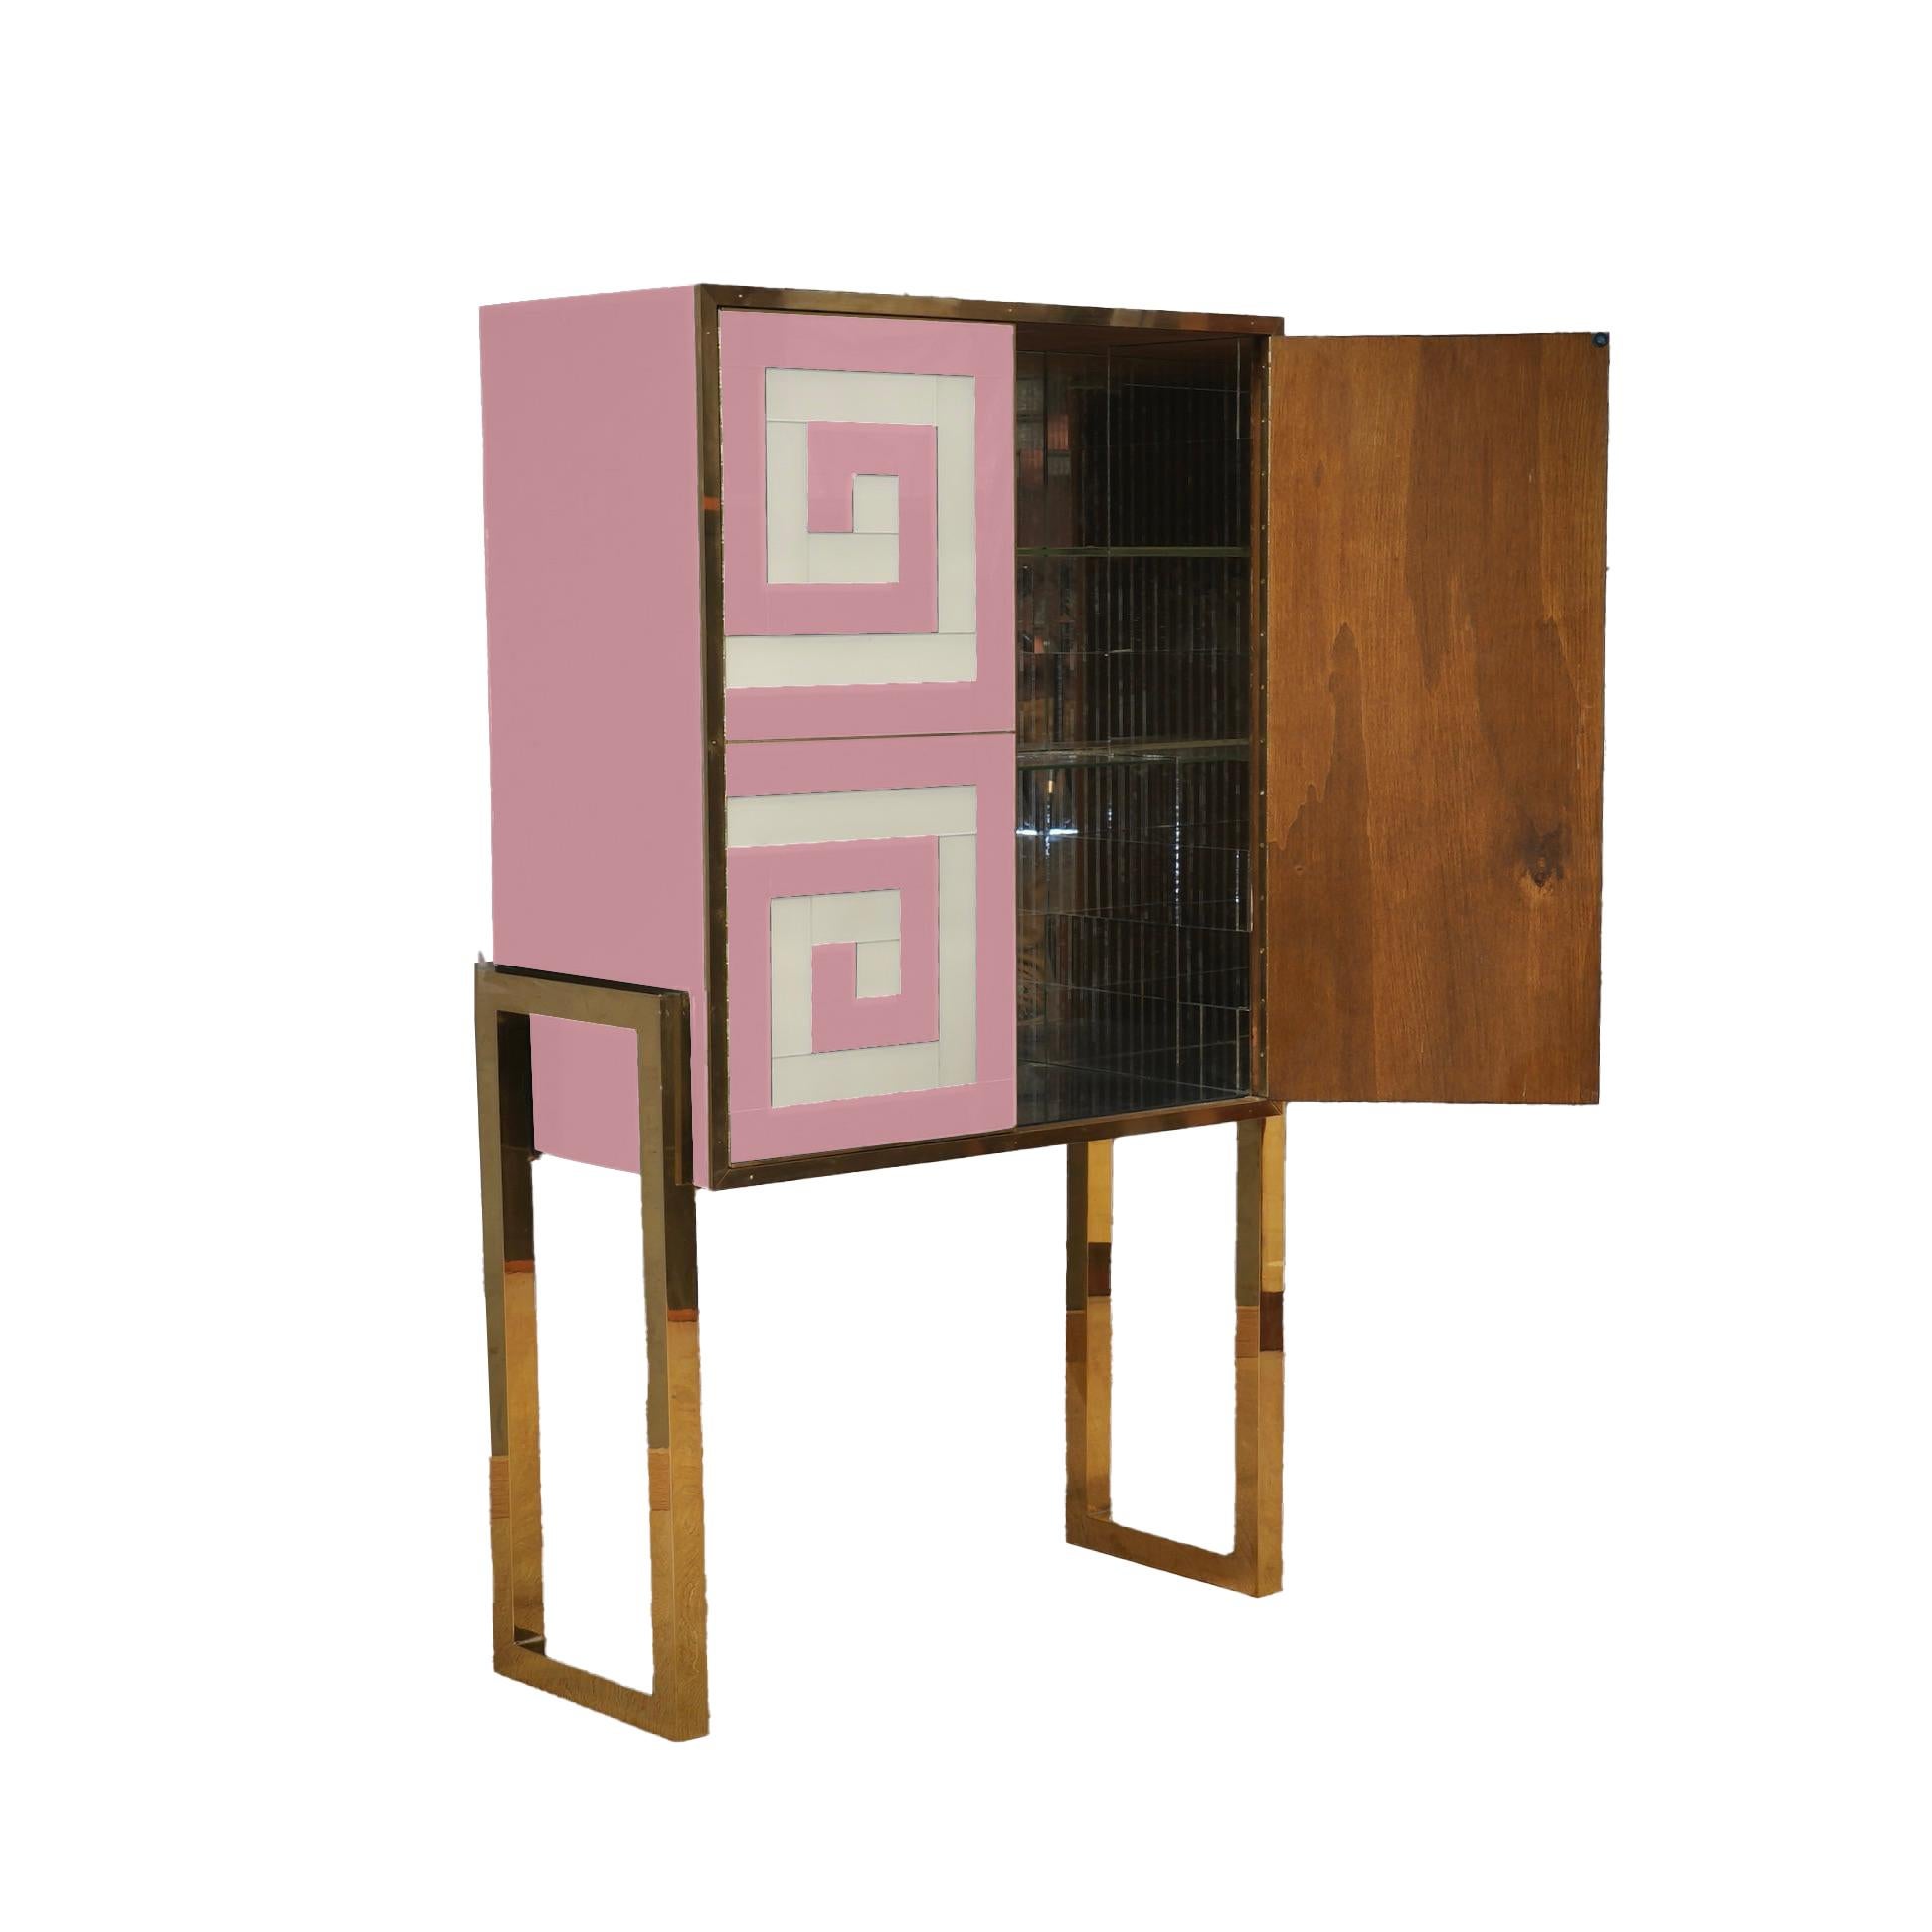 Introducing the Modern Bar Cabinet in Murano Glass Pink & White with Brass Legs and Trim, a masterpiece of Italian craftsmanship that combines the timeless elegance of Murano glass with the sophistication of modern design. 

This unique bar cabinet